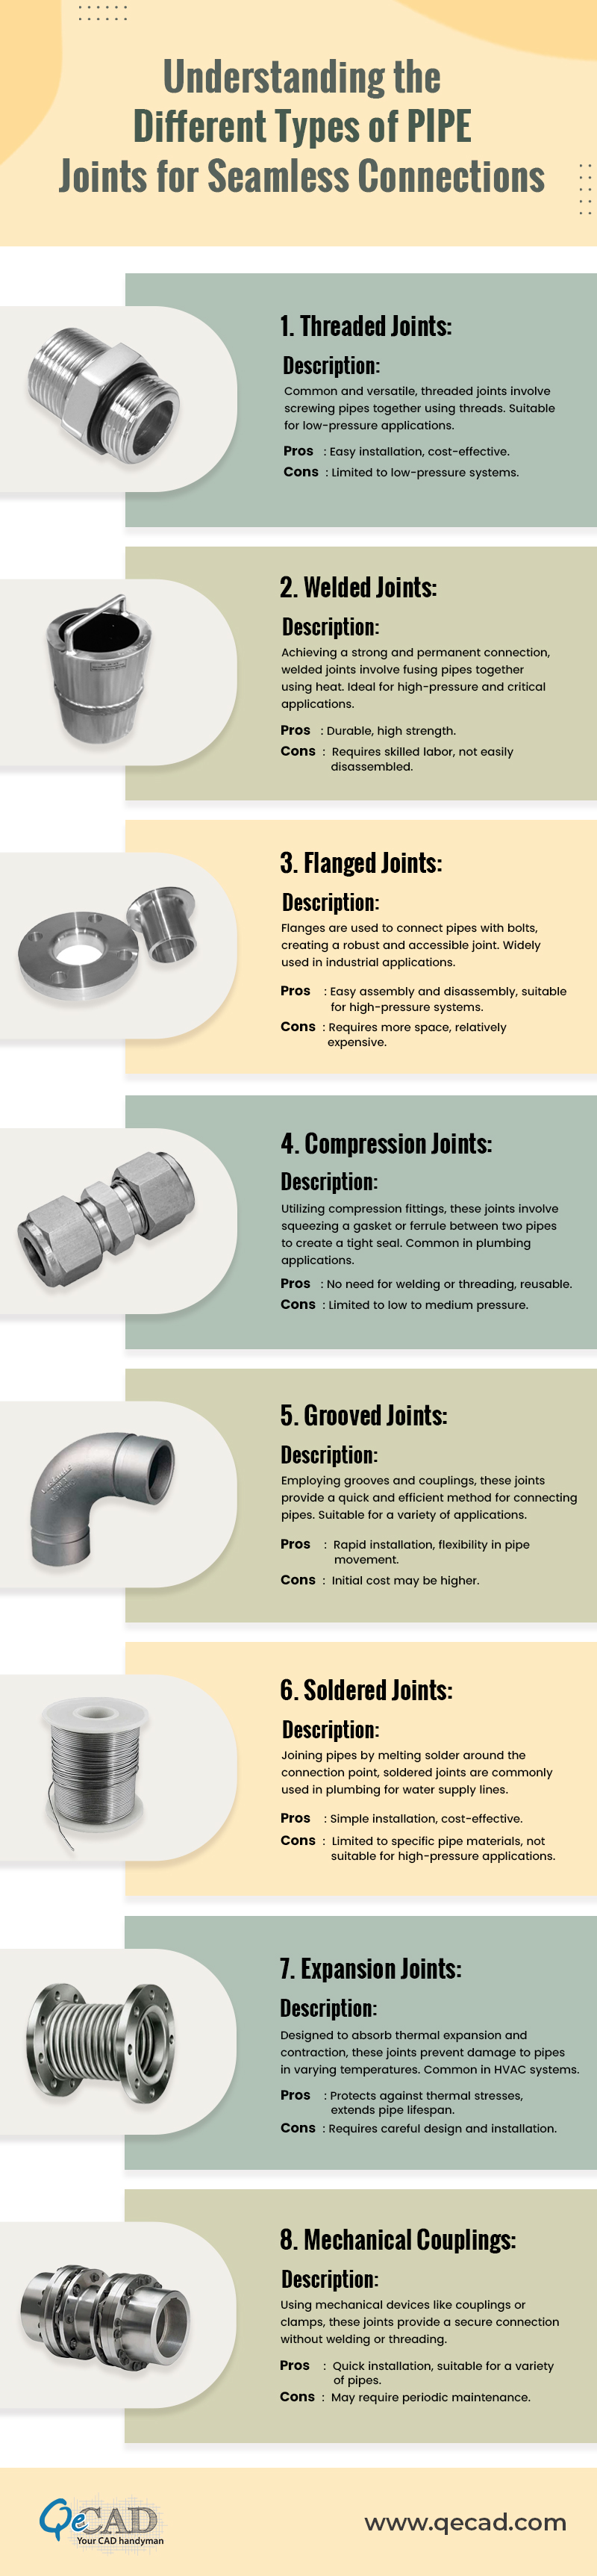 Exploring Diverse Pipe Joint Solutions